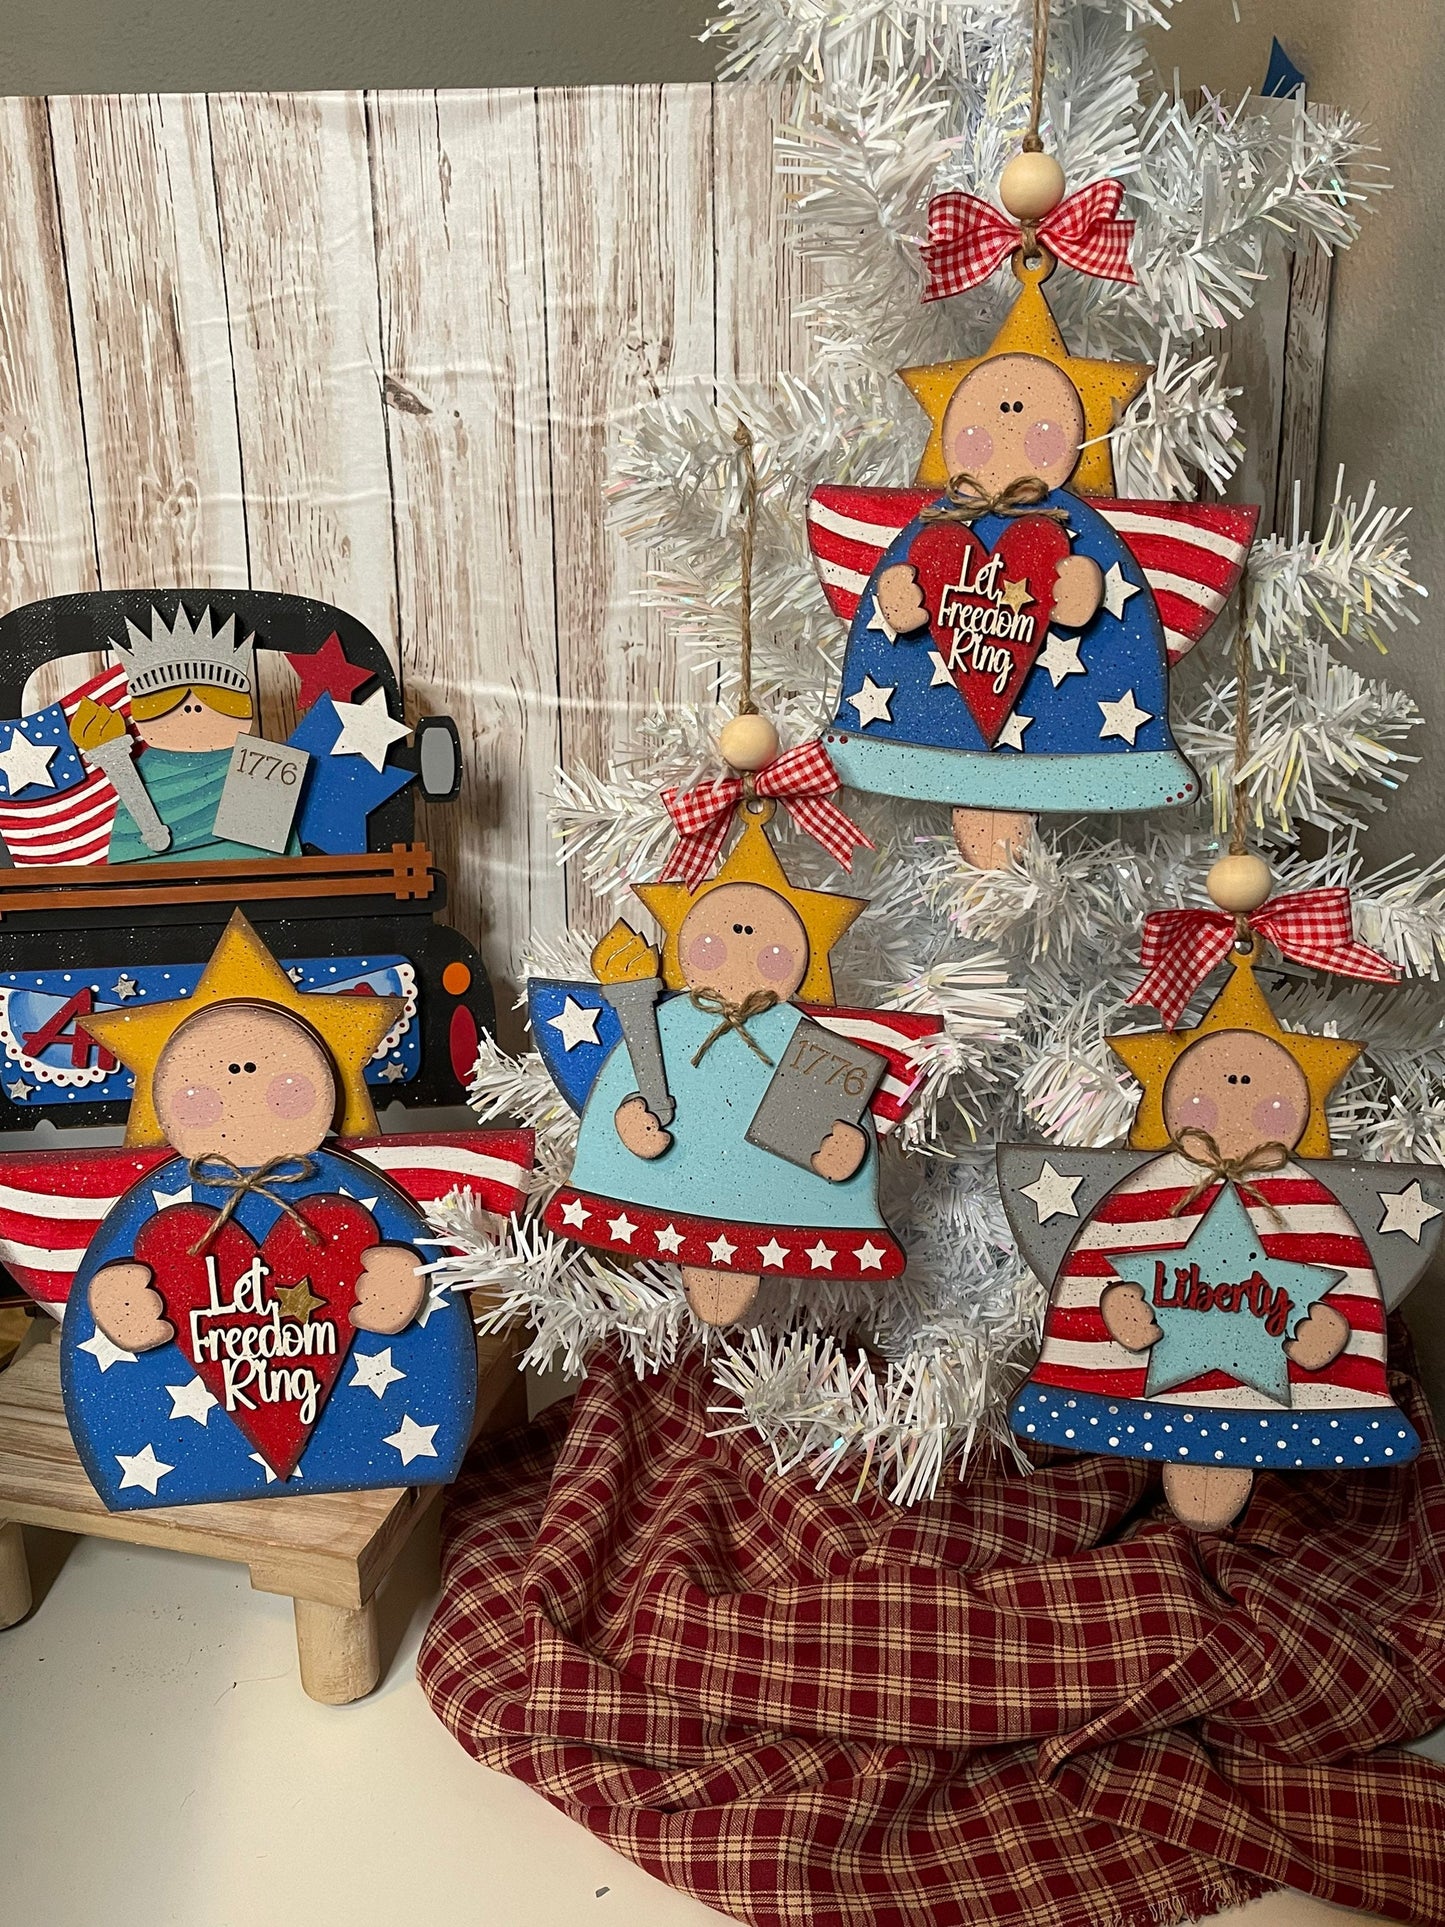 3 Patriotic Angel Ornaments, 8 inches tall, wood cutouts, unpainted ready for you to finish